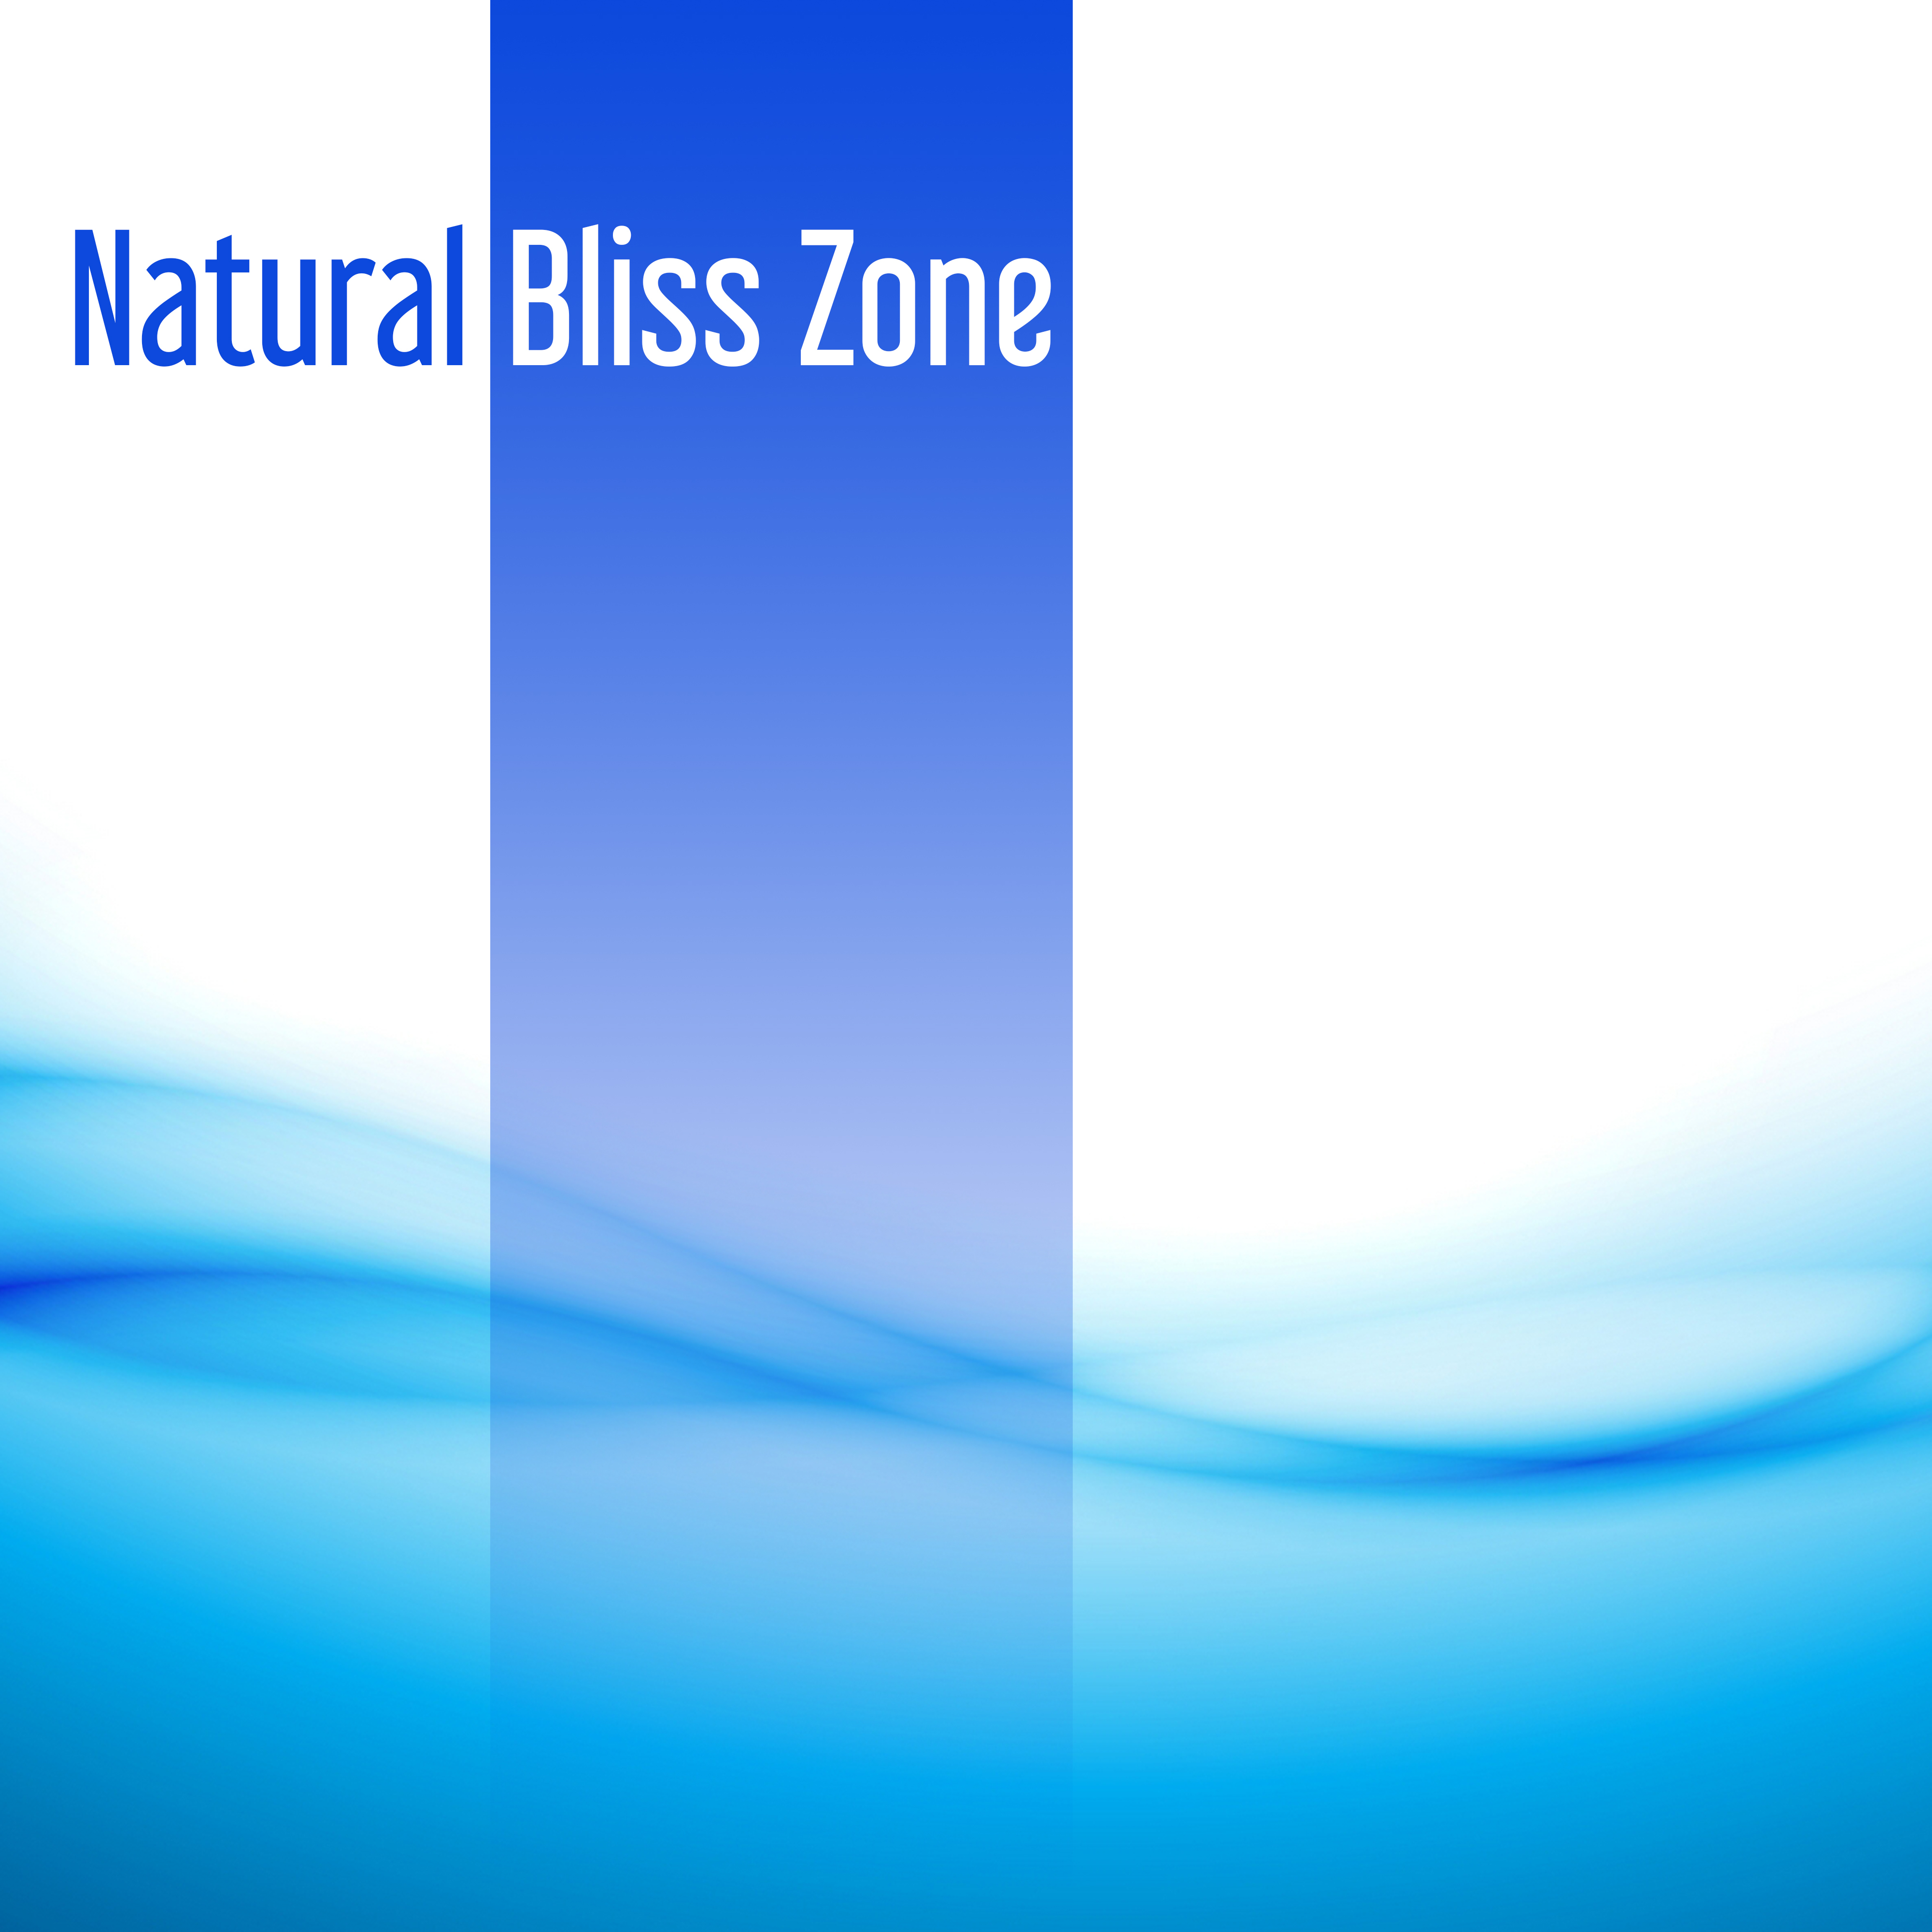 Natural Bliss Zone